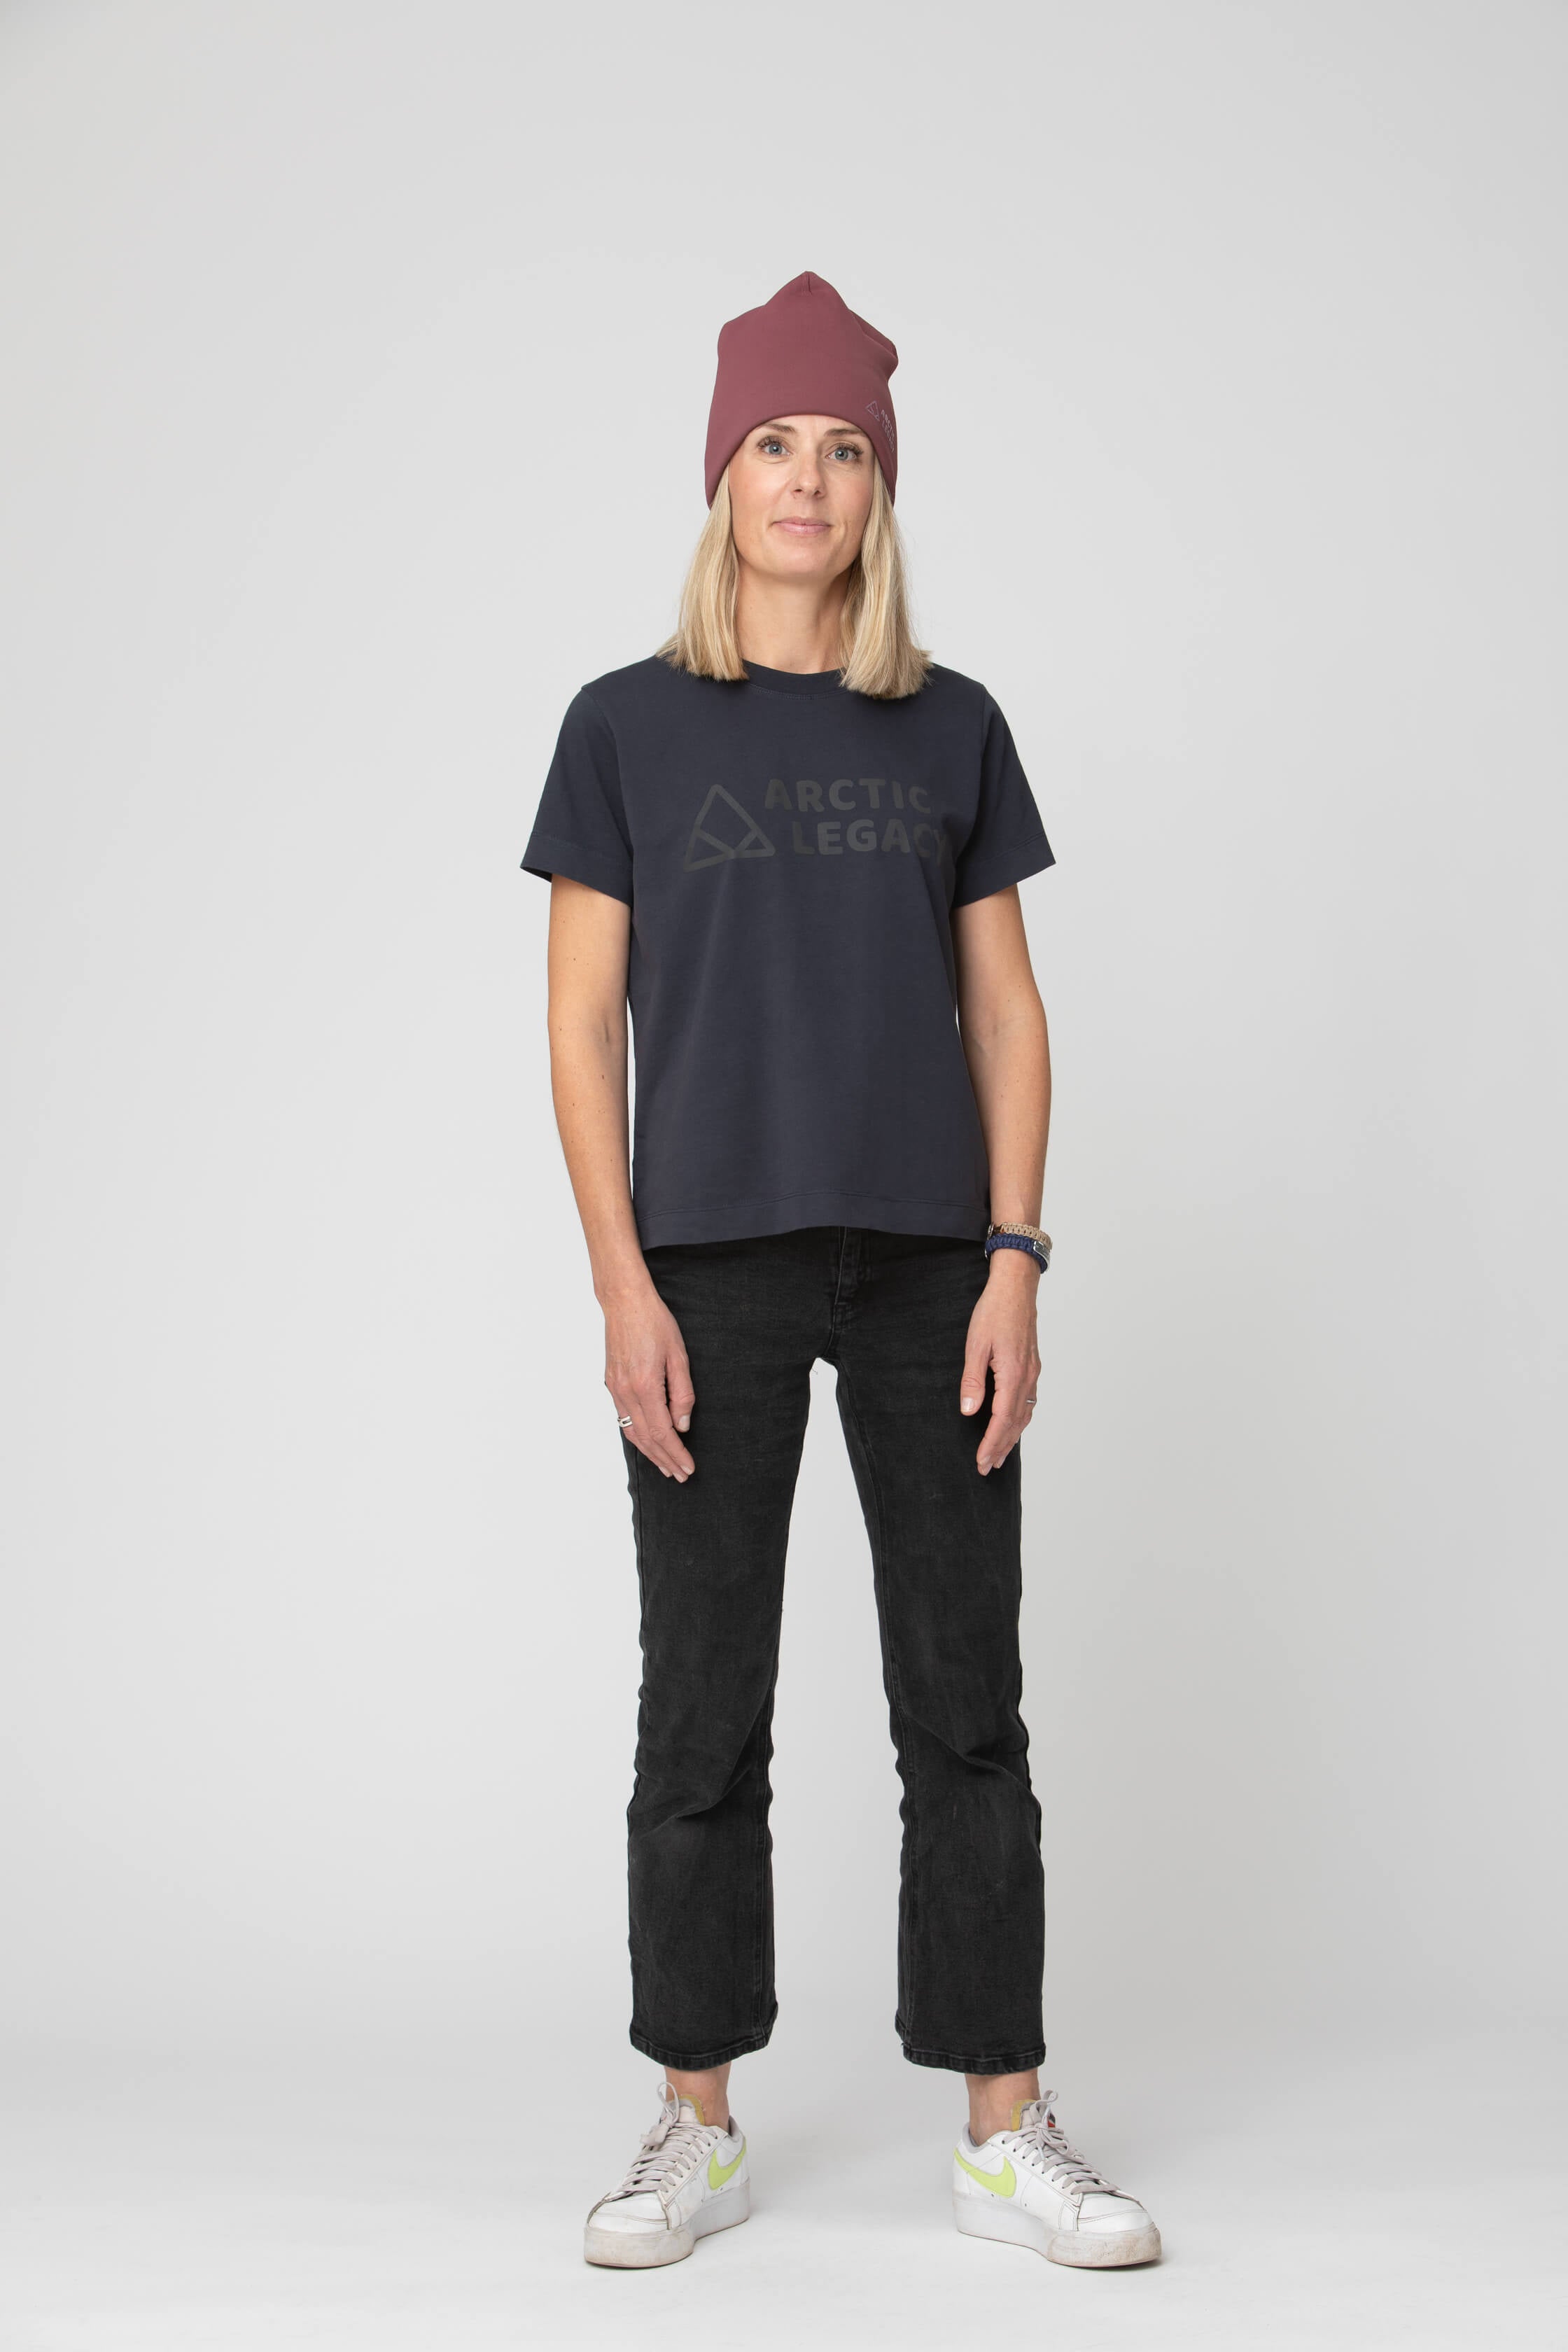 Women's blue t-shirt - front view of the Arctic Legacy Milo Organic Tee#color_dark-navy